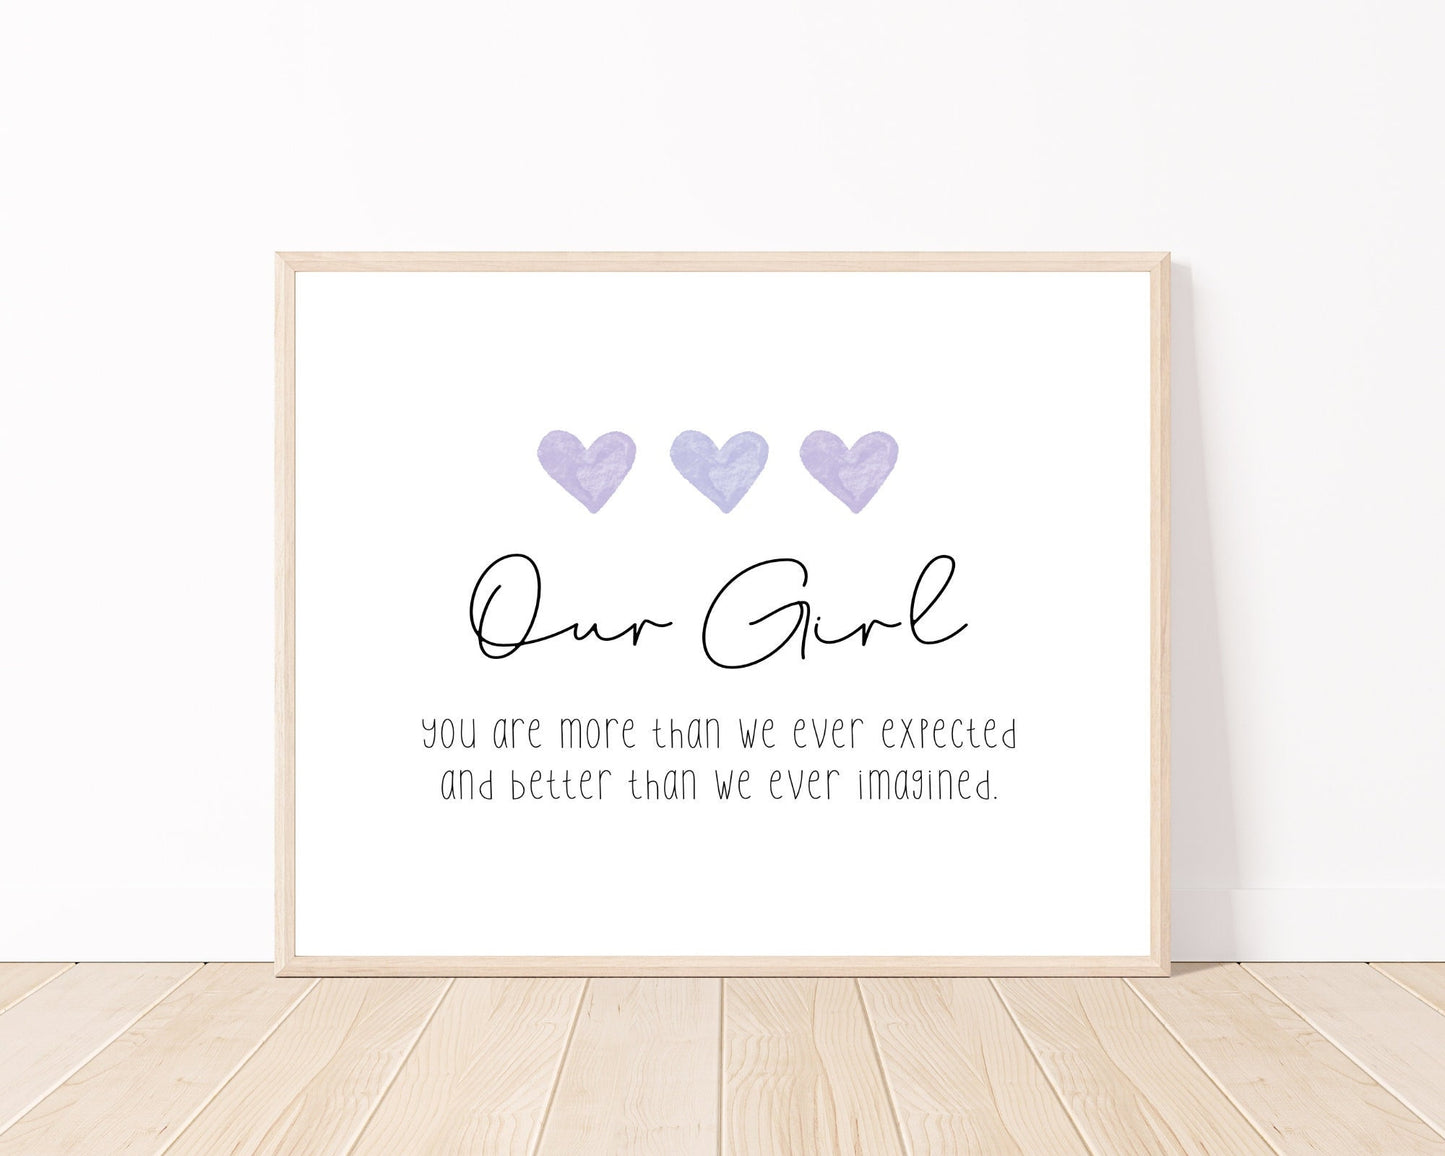 A little girl’s room digital print placed on a white wall and parquet flooring that has three purple hearts at the top, and a piece of writing that says: “Our girl, you are more than we ever expected and better than we ever imagined.”